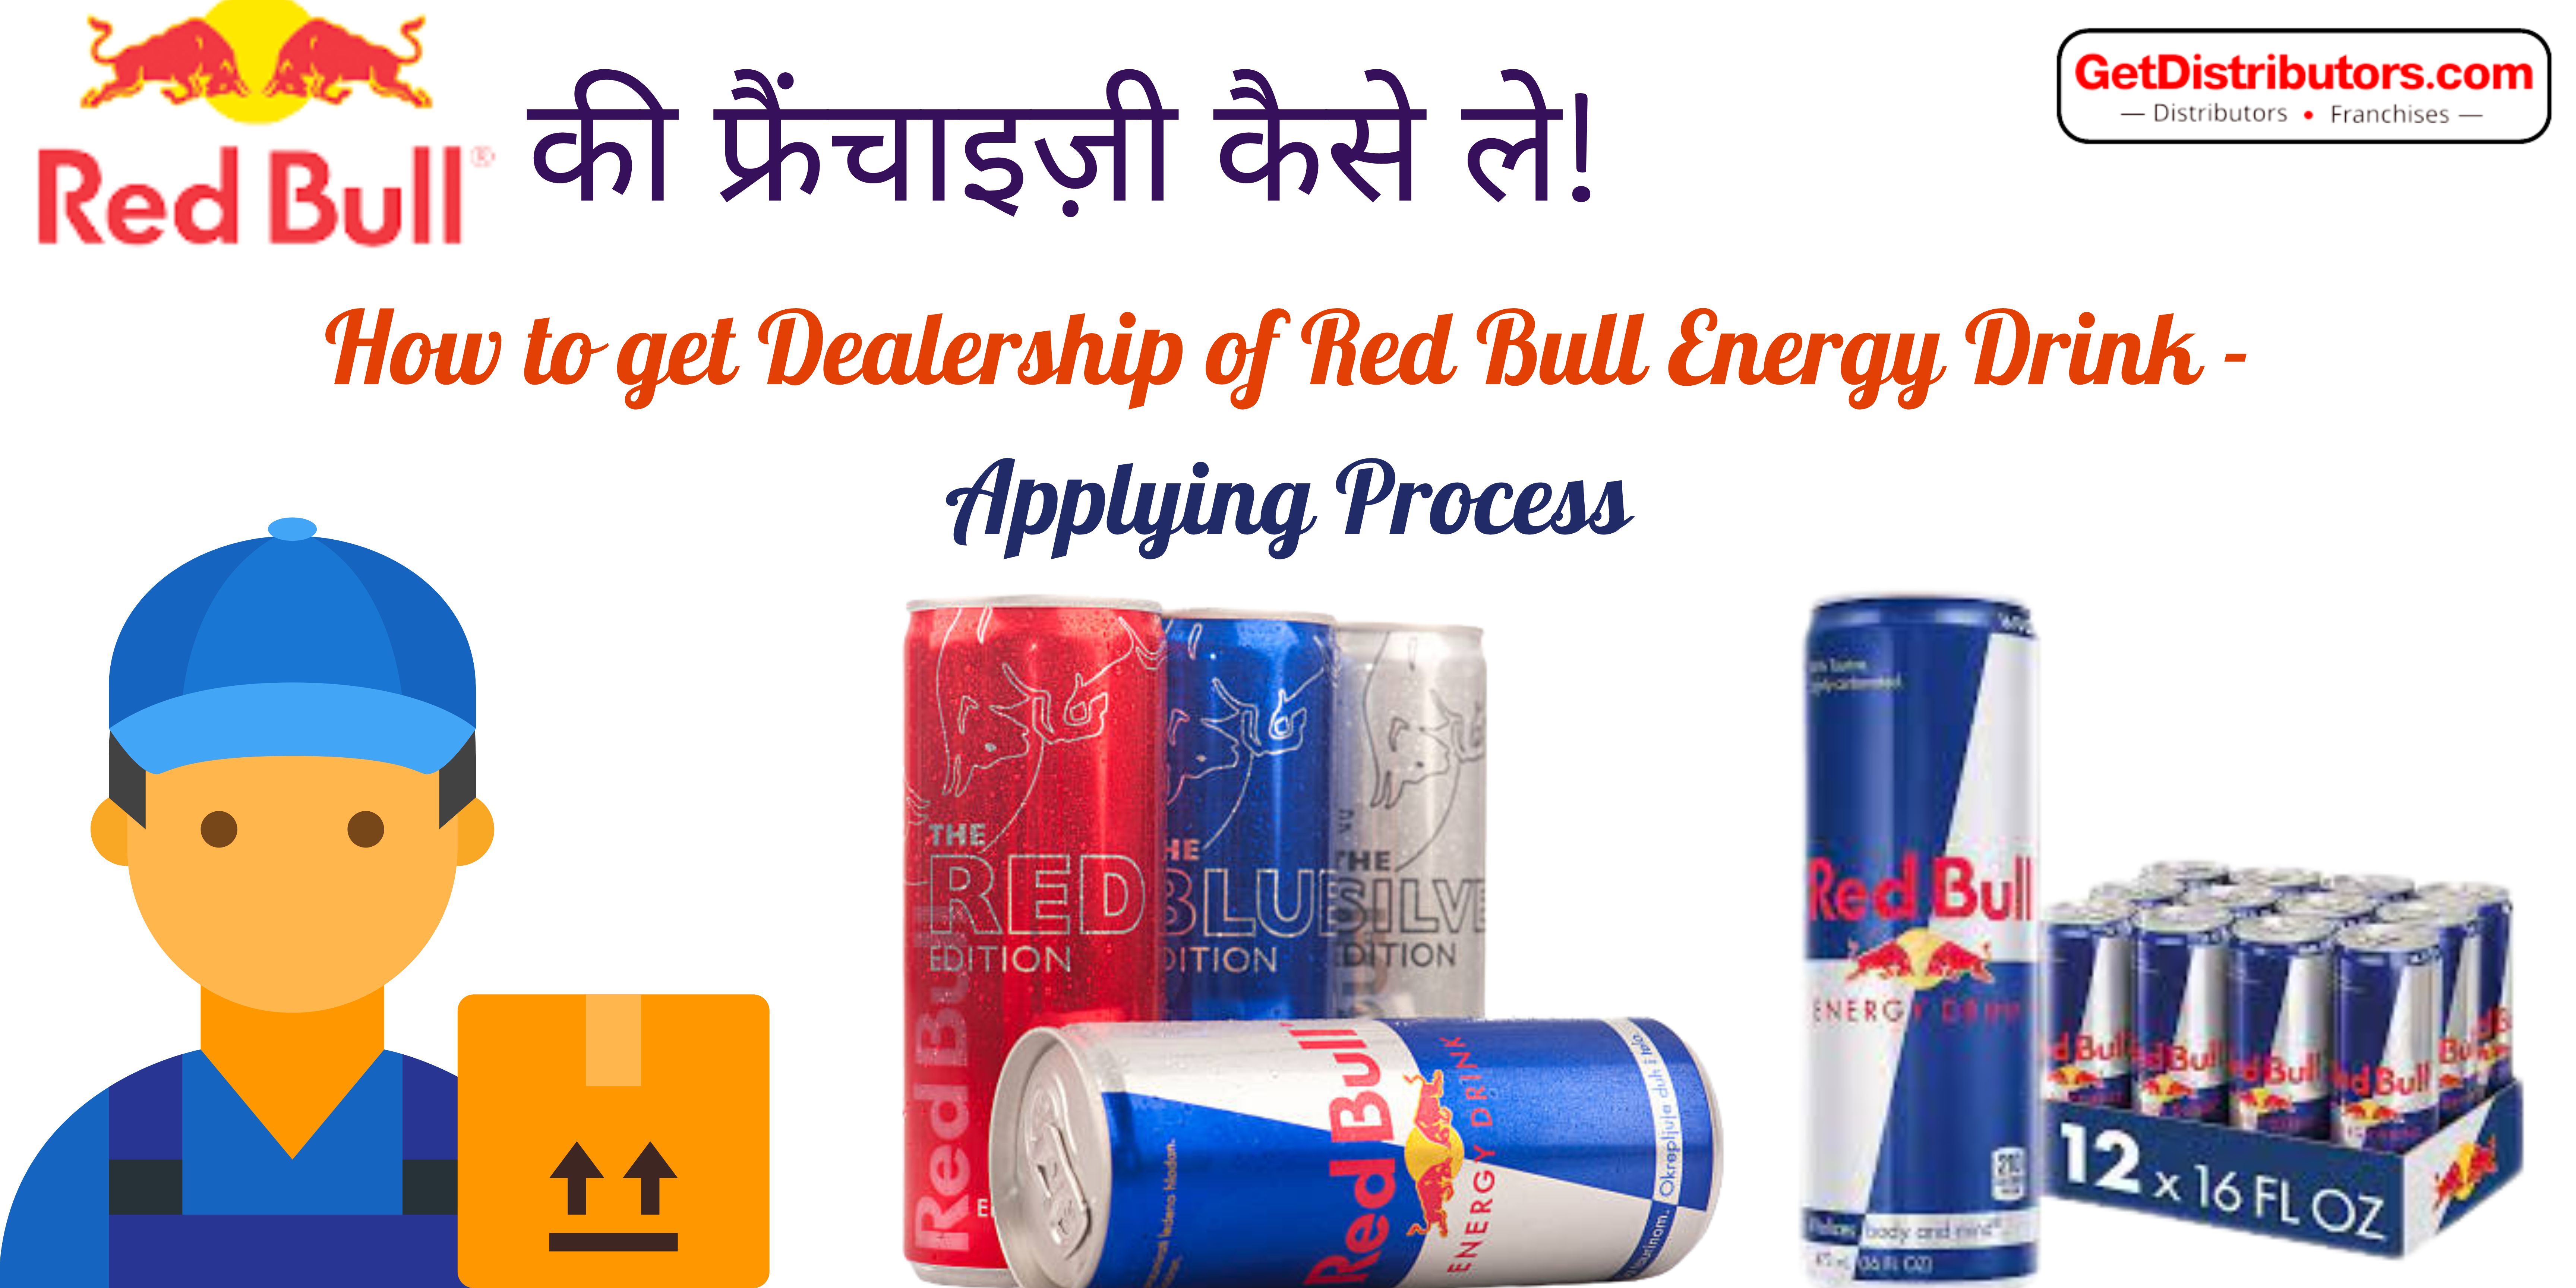 How to get Dealership of Red Bull Energy Drink: Applying Process